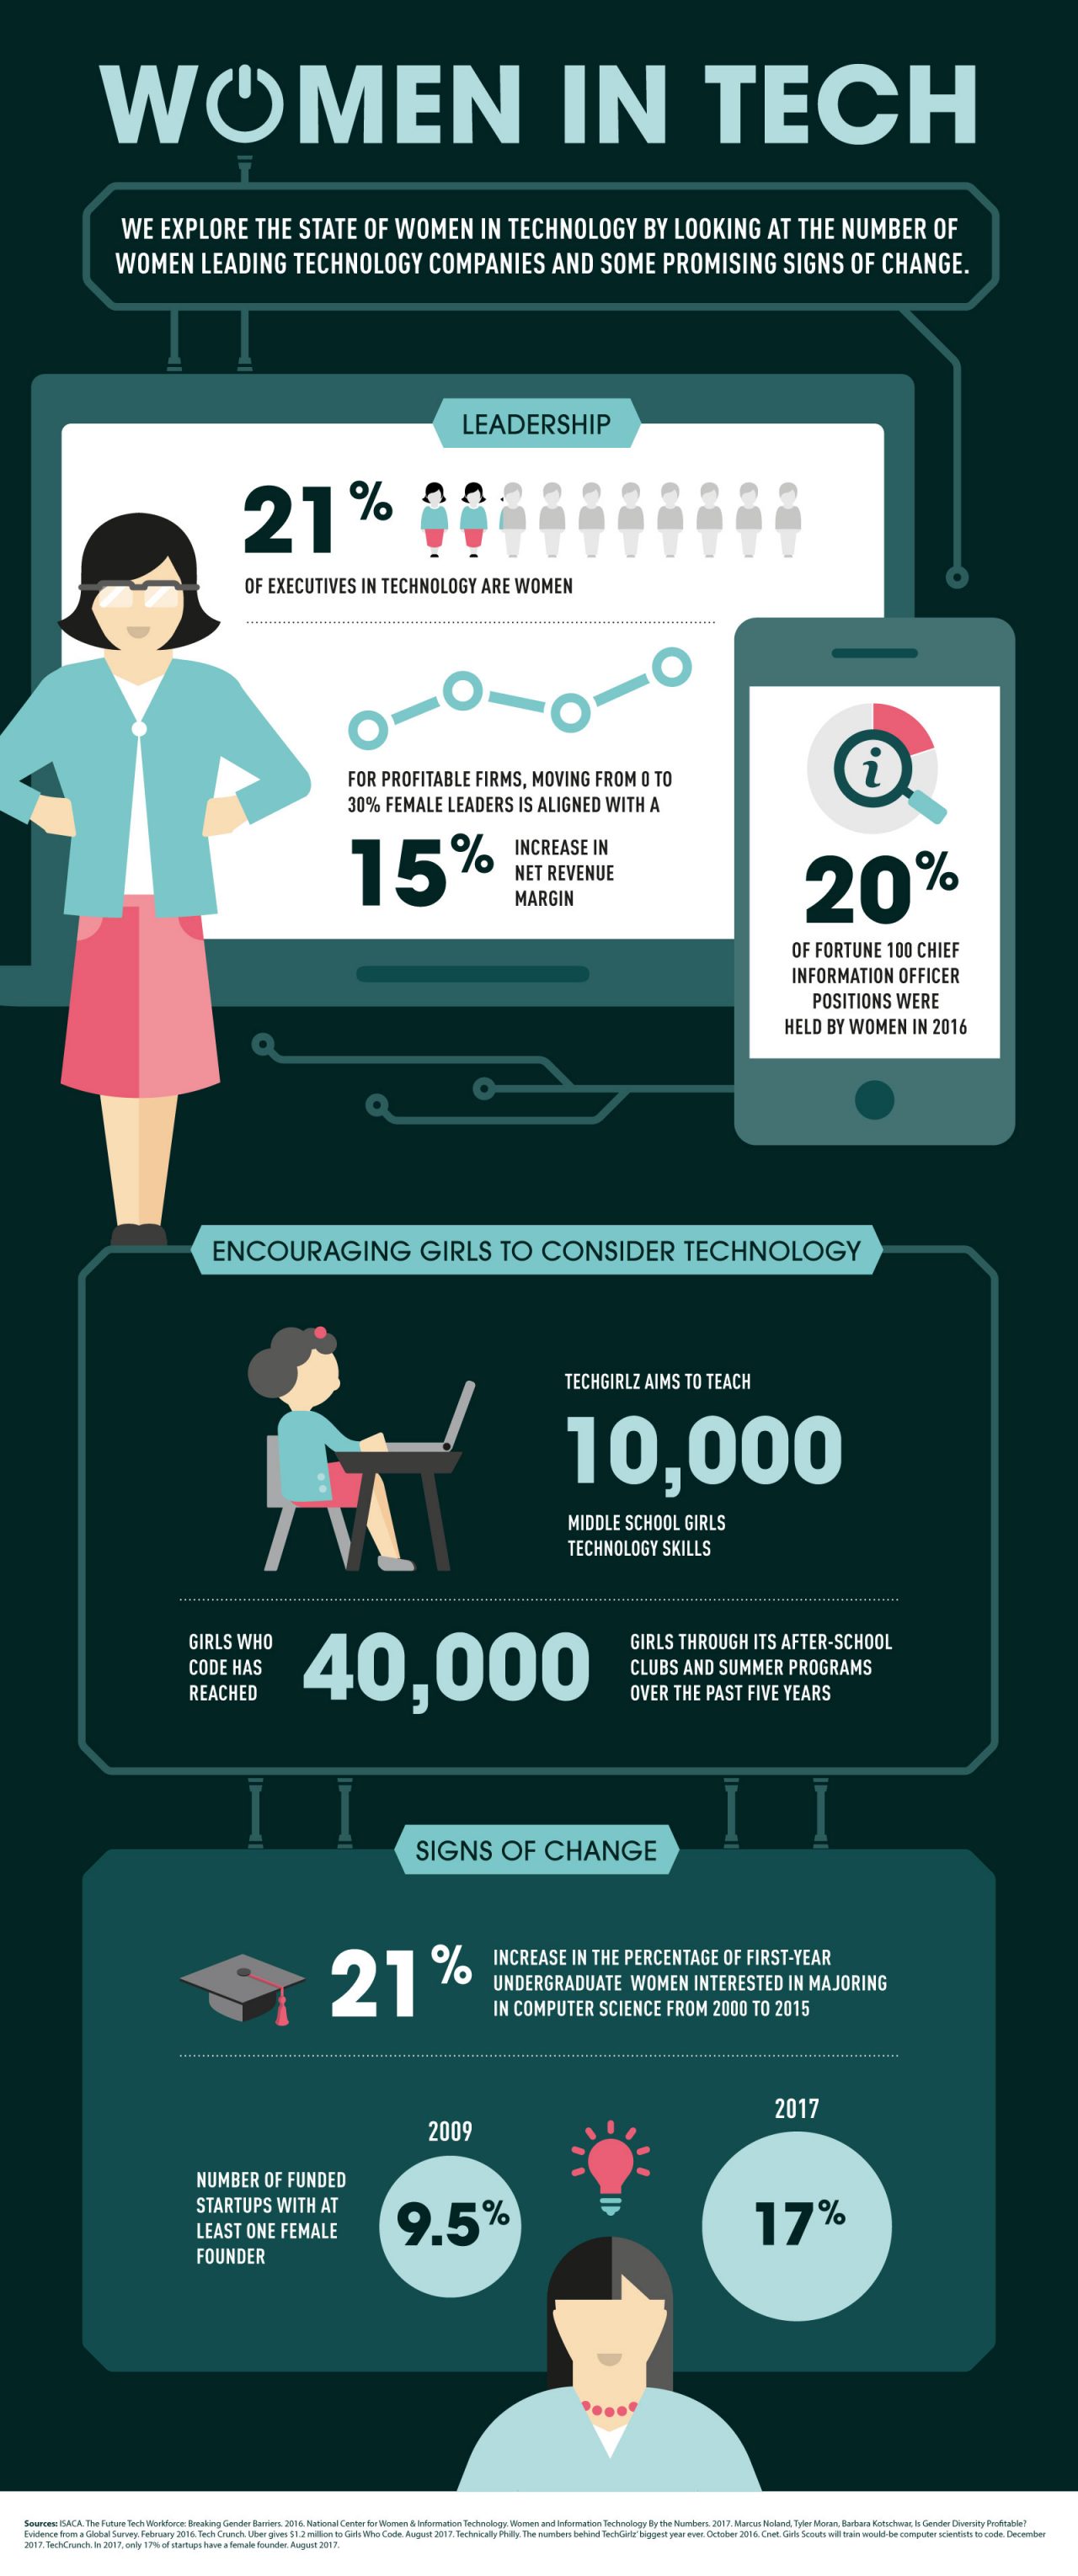 Statistics about women's participation and growth in the tech industry